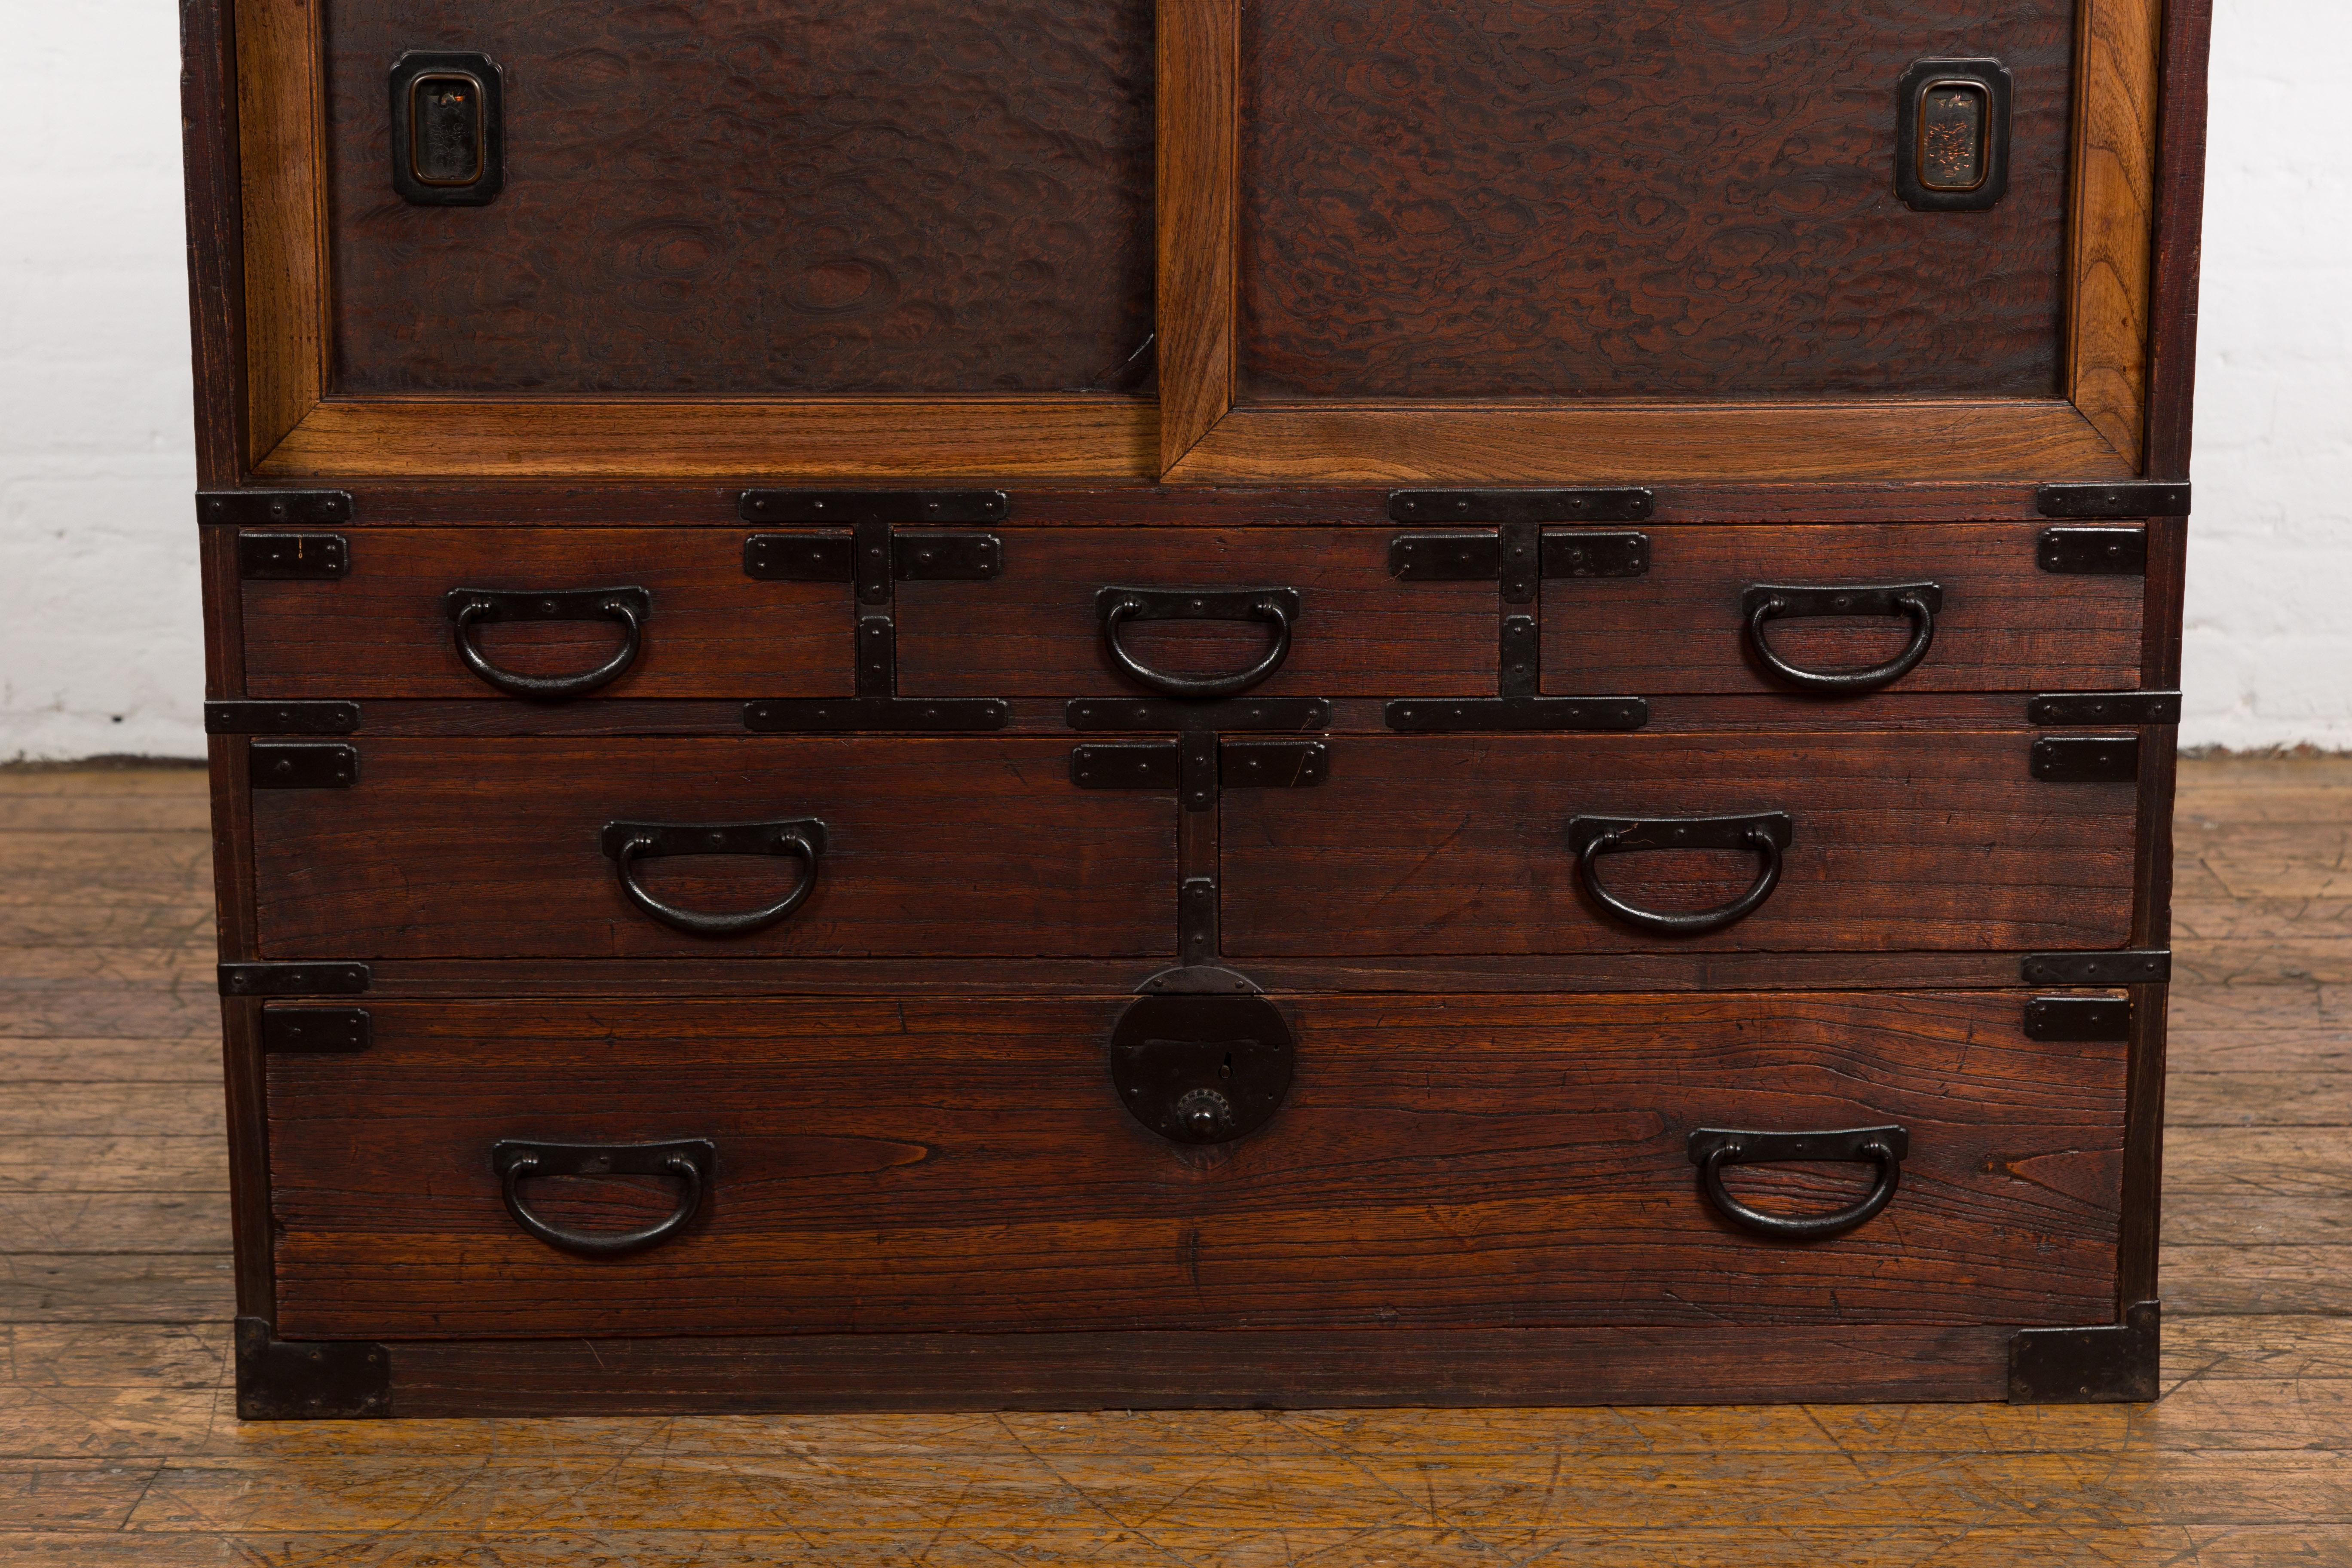 Japanese Meiji Period 19th Century Tansu Chest with Sliding Chest and Drawers For Sale 2